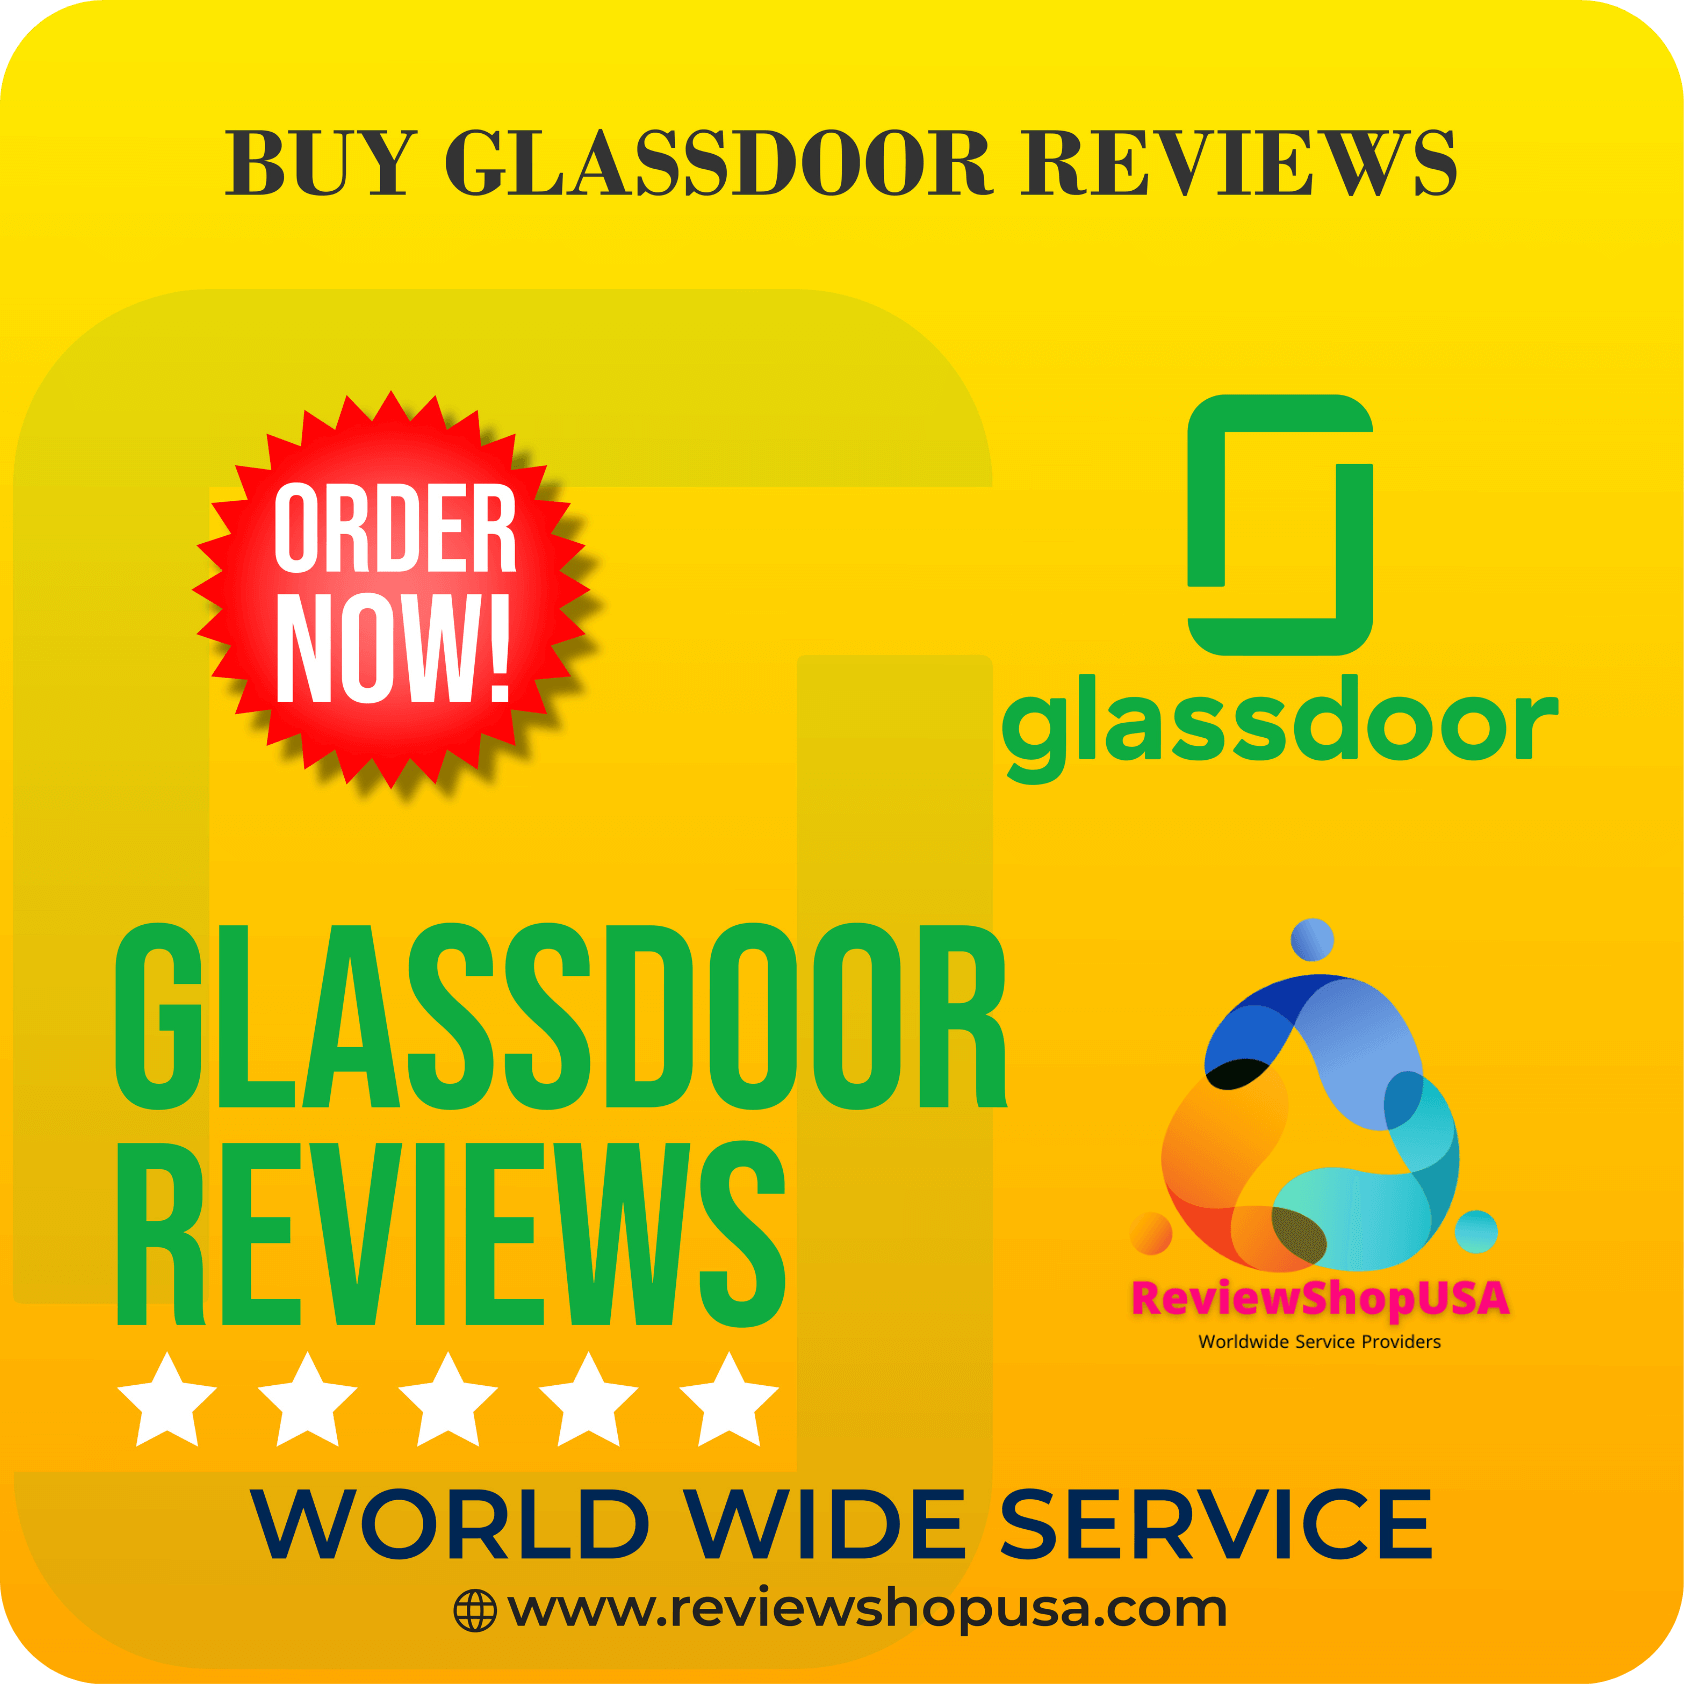 Buy Glassdoor Reviews - Buy 5 Star Reviews for Your Business...